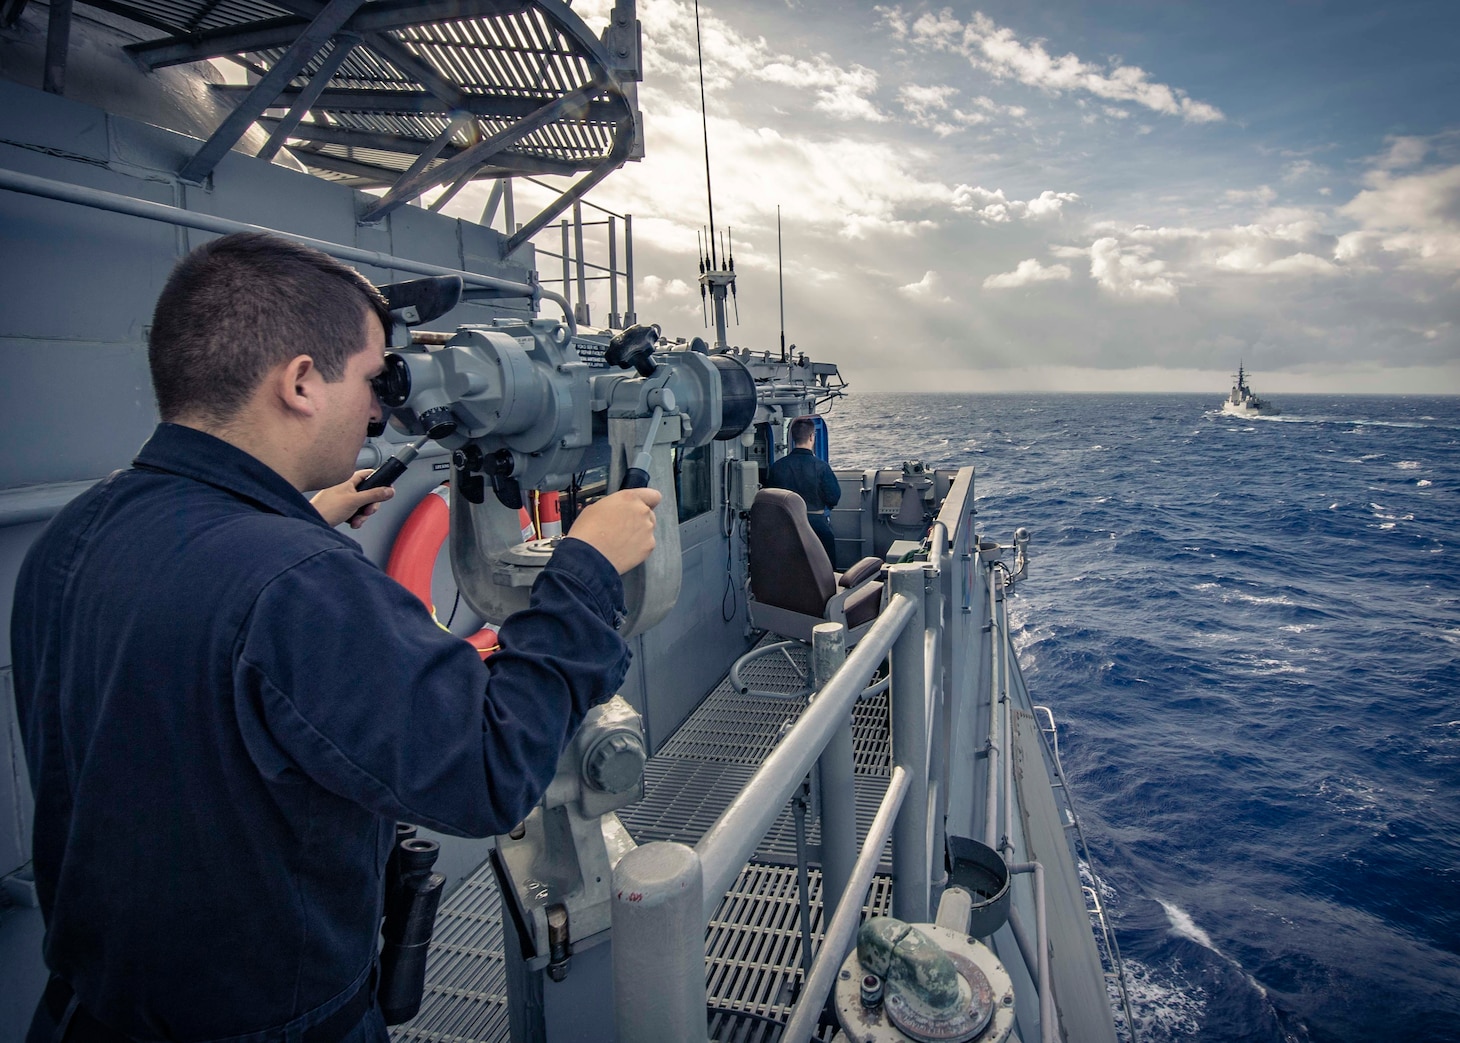 PHILIPPINE SEA (Nov. 21, 2019) Seaman Kevin Henriquez, from New Haven, Conn., looks through binoculars on the bridge of the Ticonderoga-class guided-missile cruiser USS Chancellorsville (CG 62) as the ship maneuvers behind the Royal Australian Navy ship HMAS Hobart (DDG 39) during a group maneuvering exercise with ships from the Royal Australian Navy, Royal Canadian Navy, and Republic of Korea Navy as part of Pacific Vanguard 2019. Chancellorsville is forward-deployed to the U.S. 7th Fleet area of operations in support of security and stability in the Indo-Pacific region.